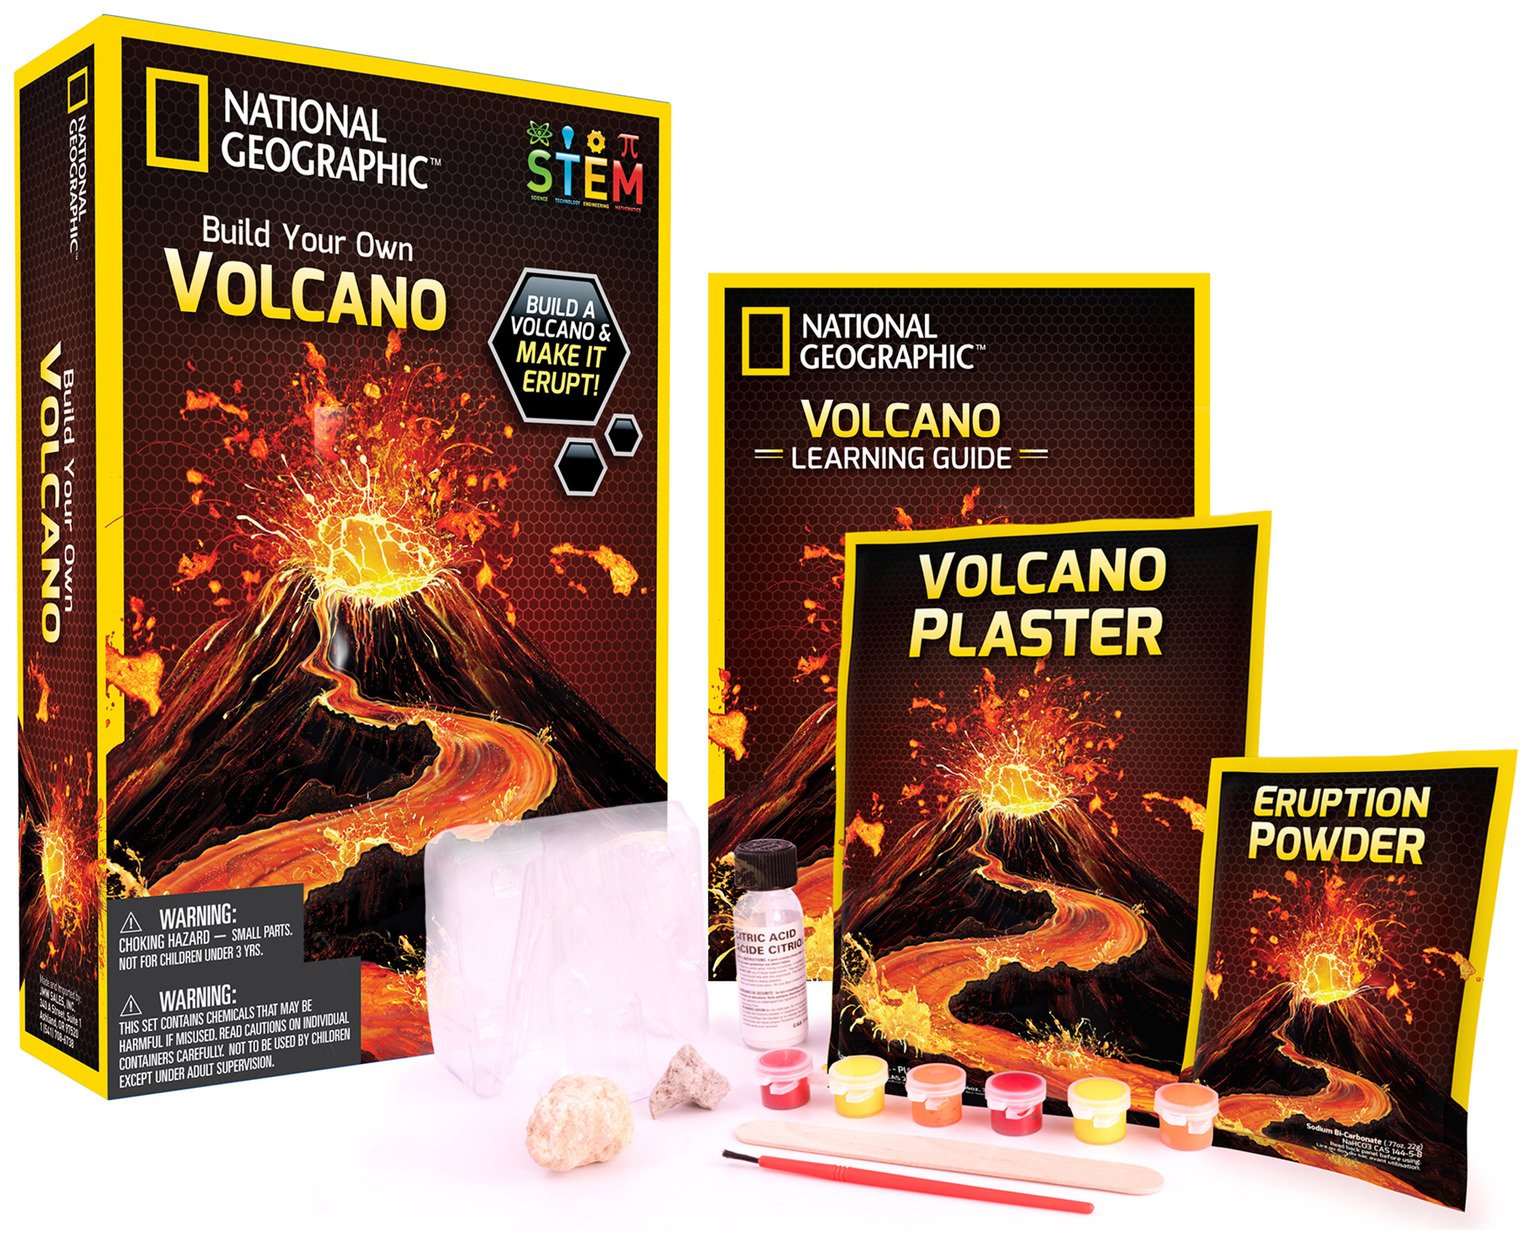 National Geographic Volcano Kit Review